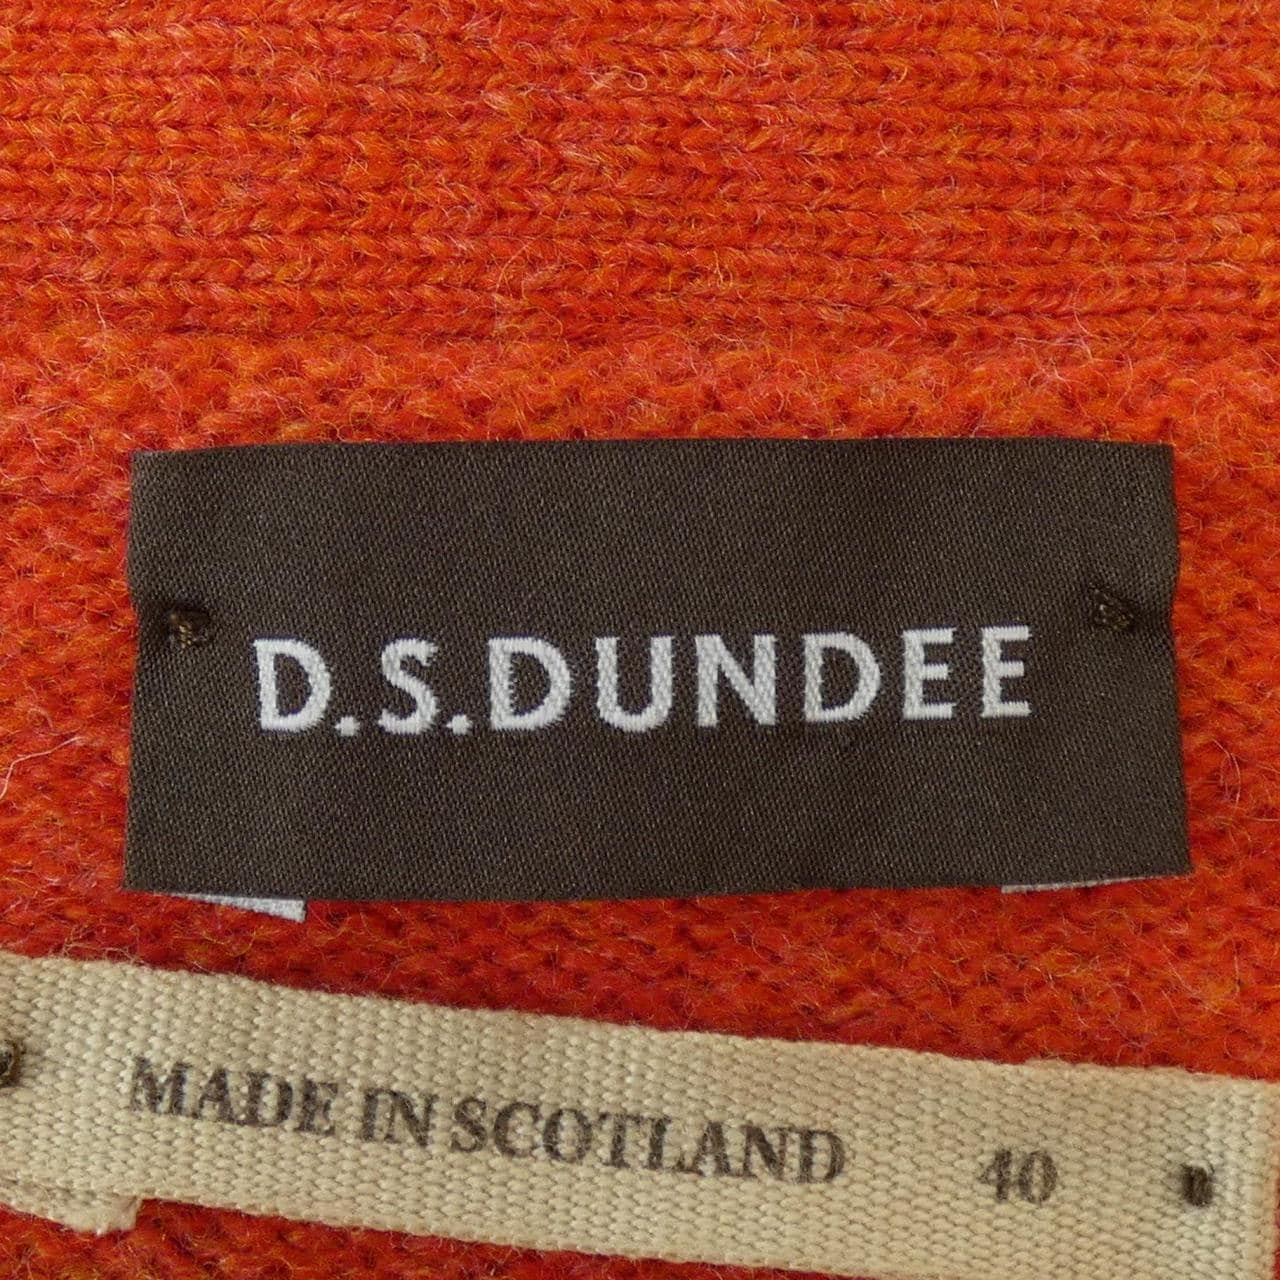 D.S.DUNDEE カーディガン